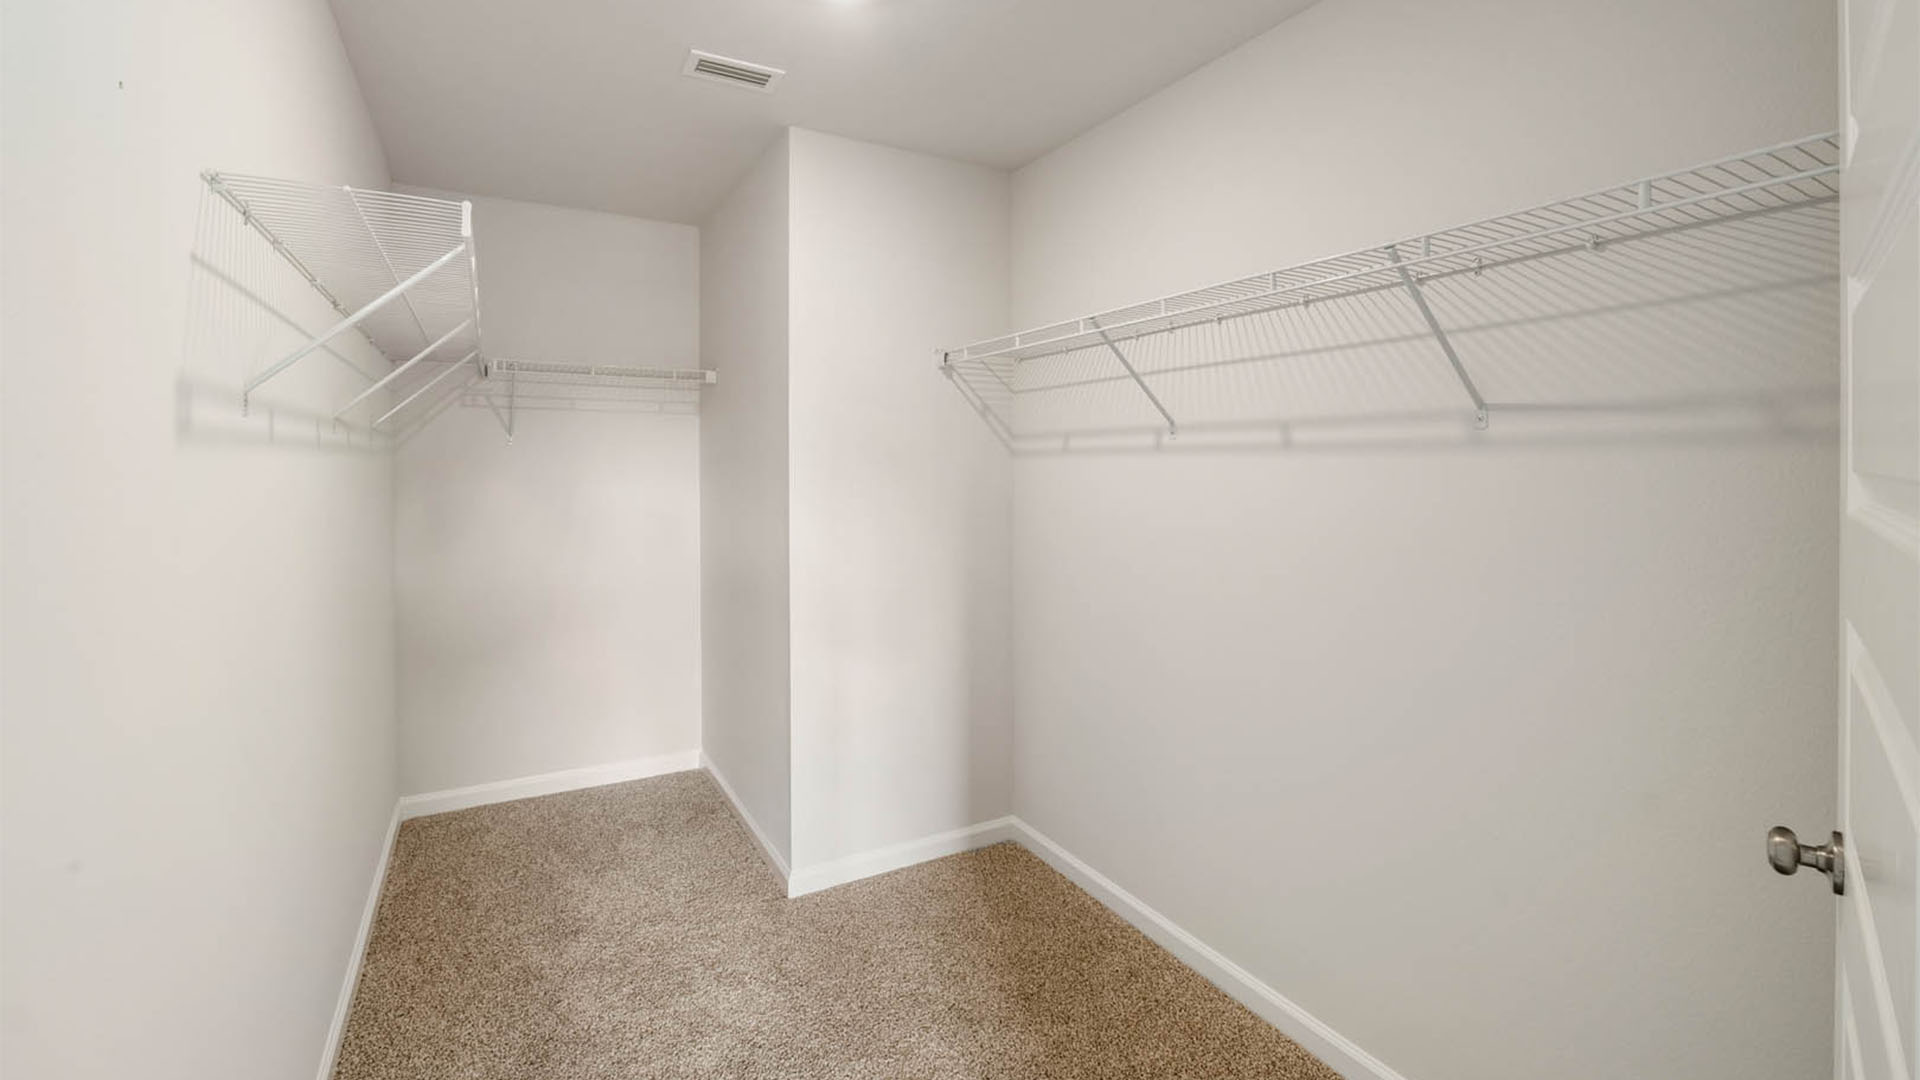 Walk in closet with ventilated shelving and carpet floor.